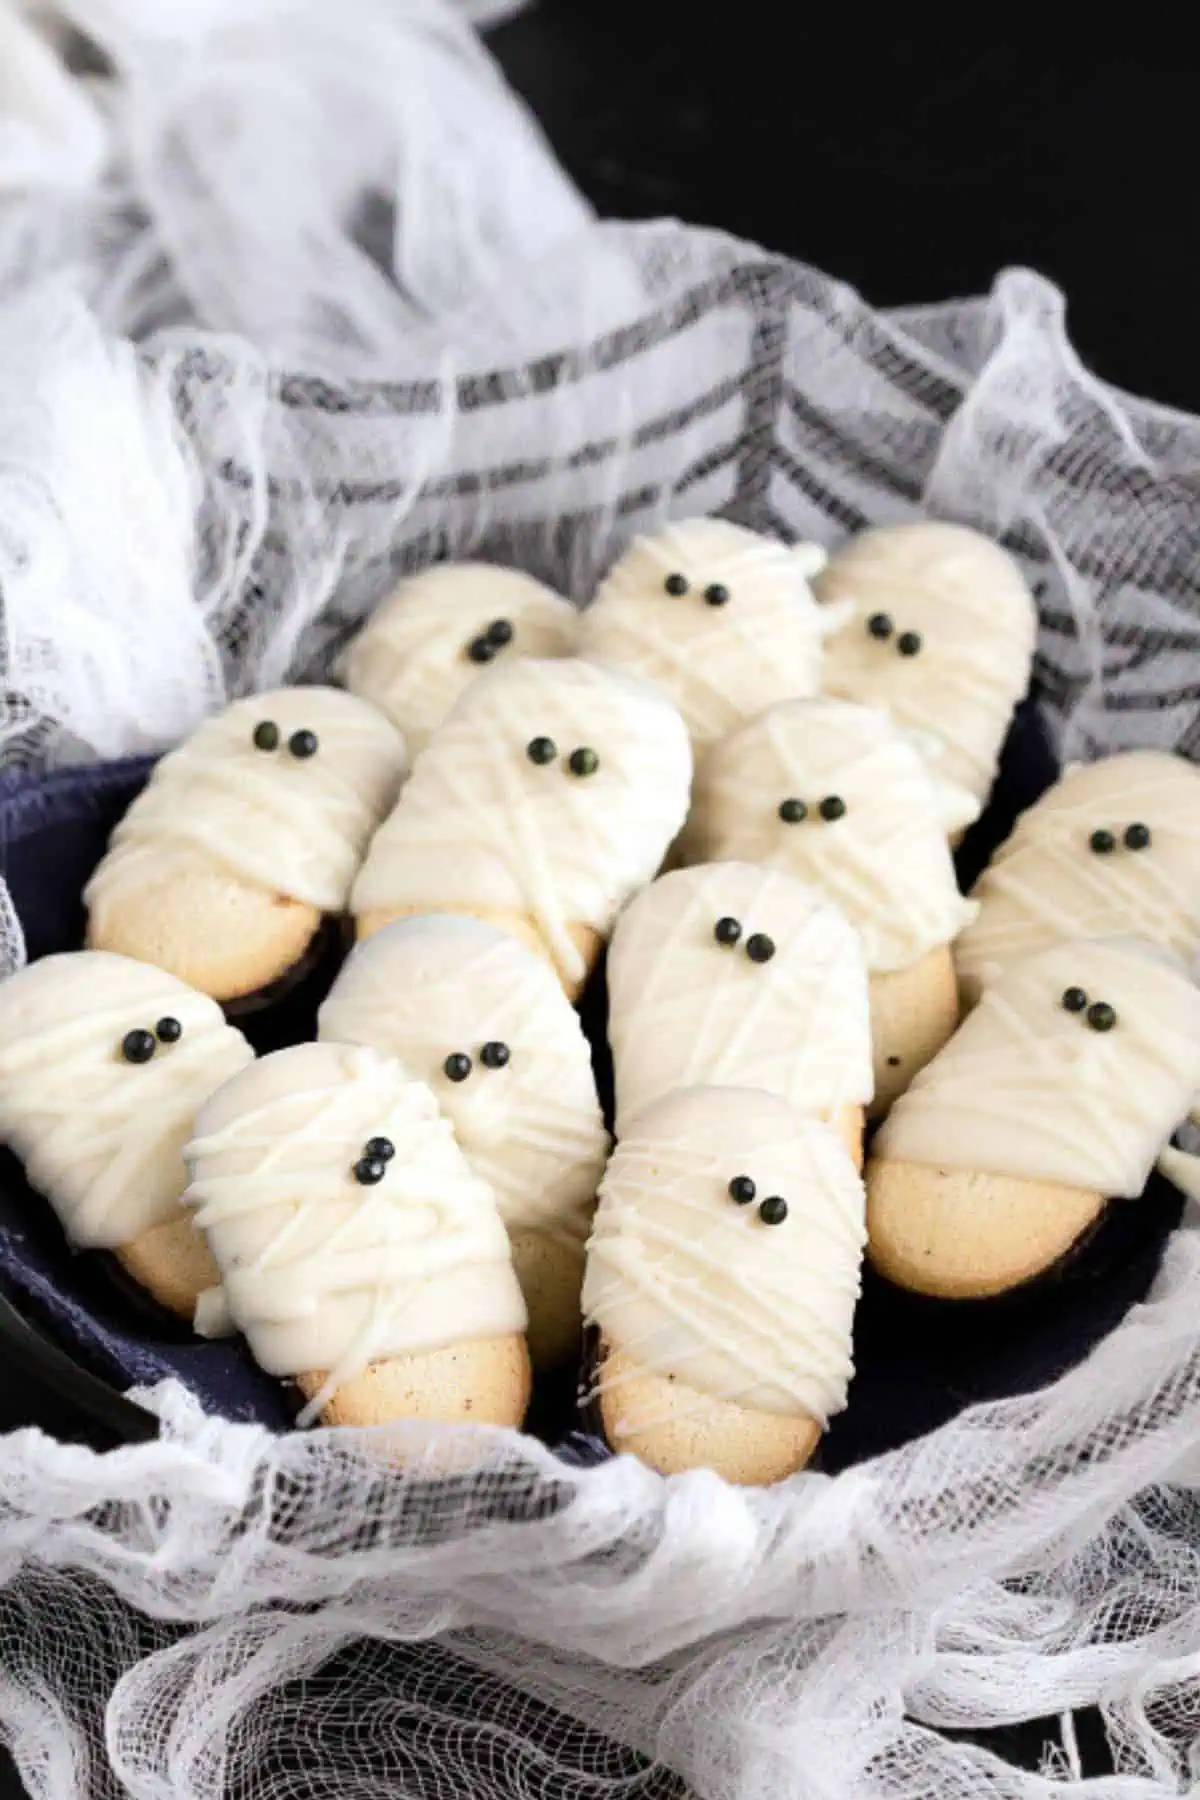 Mint miano cookies dipped in white chocolate and made to look like mummies for a halloween treat